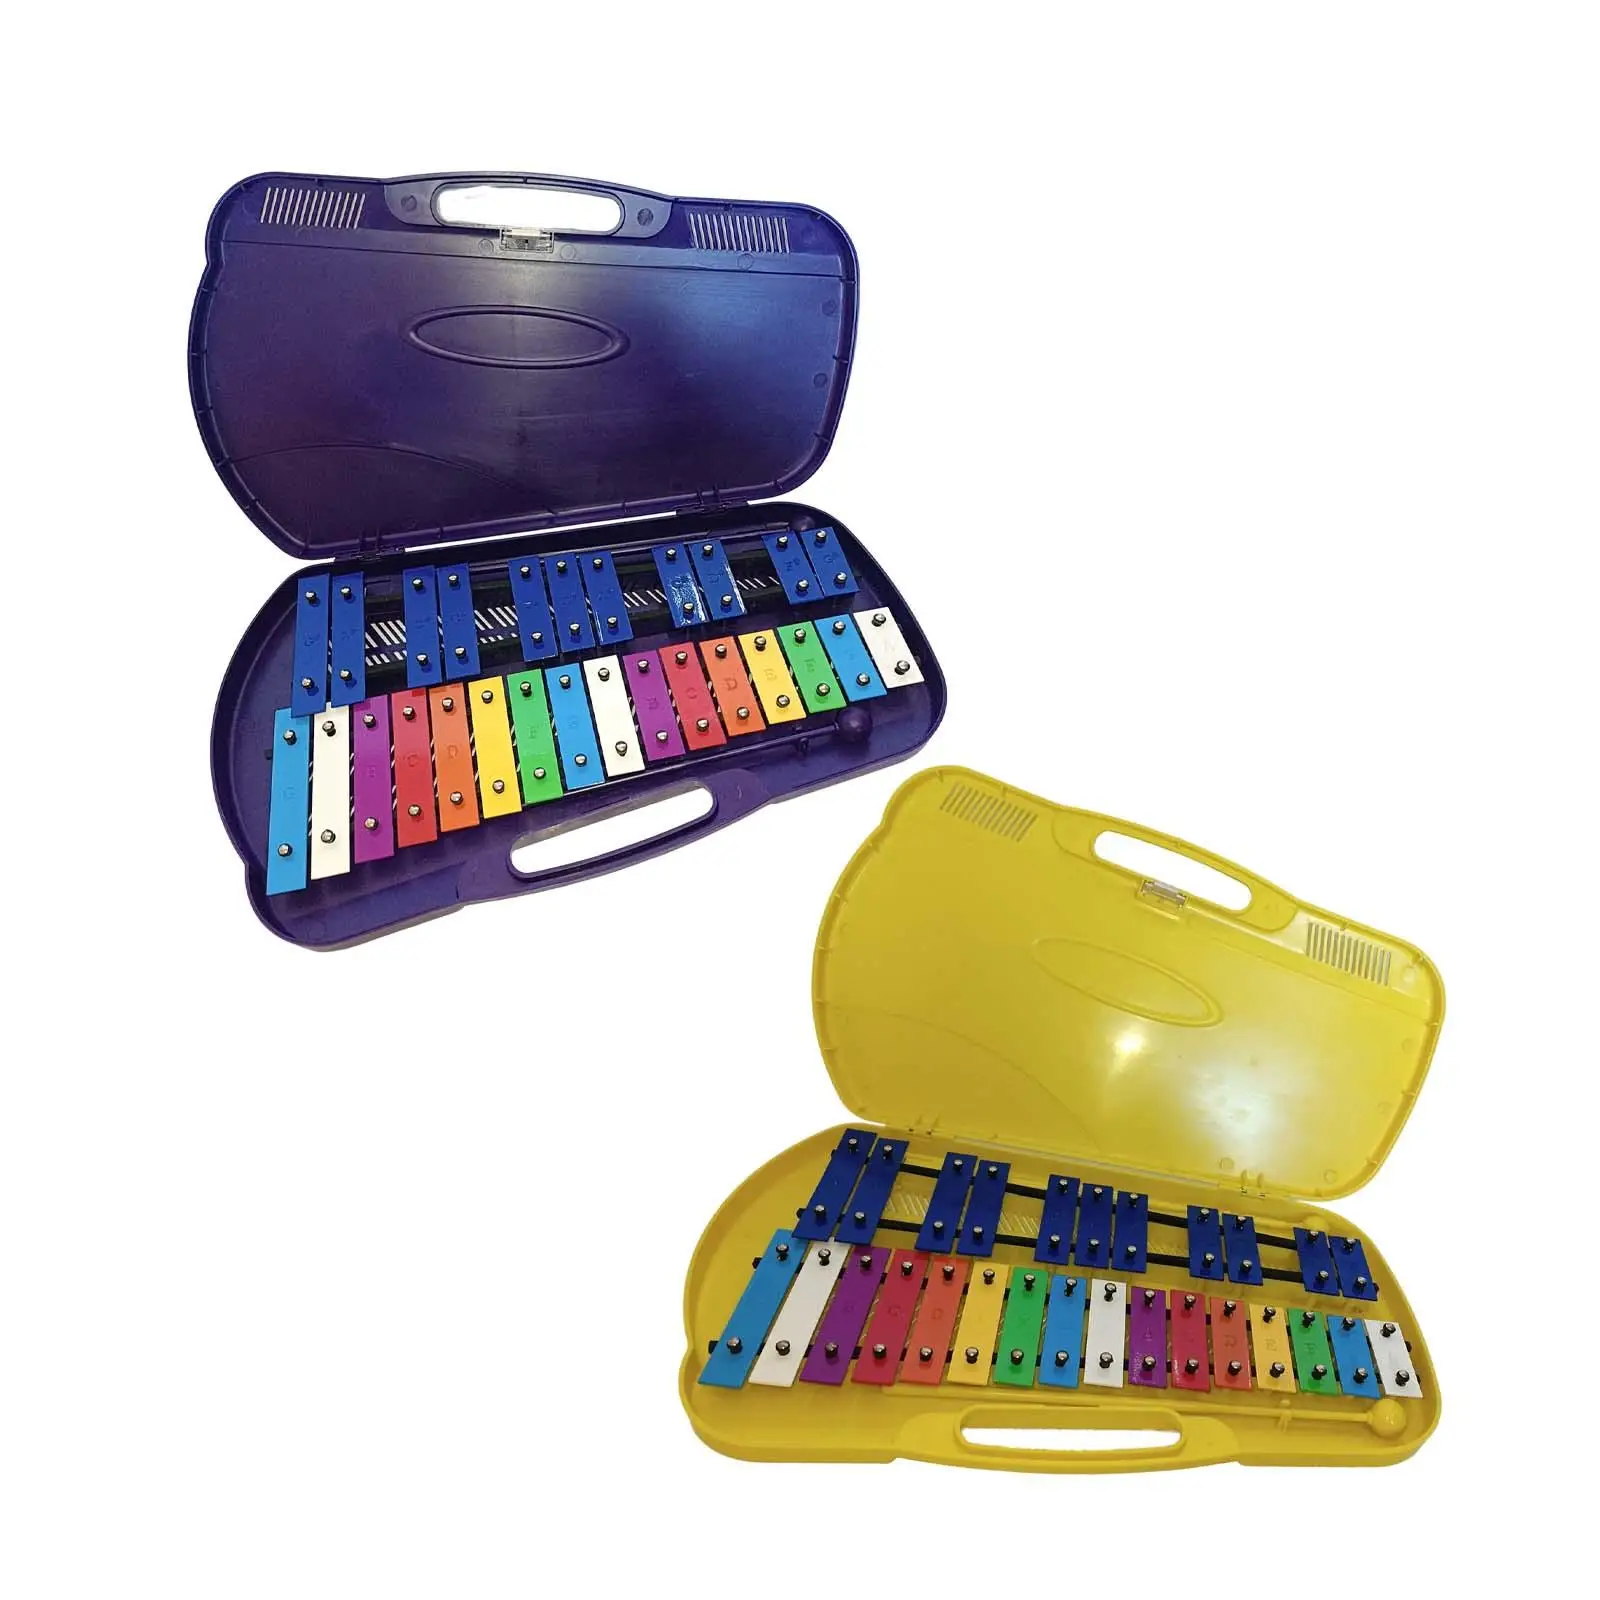 Xylophone Professional Chromatic Keys Cleartuned in 27 Notes for Gifts Music Teaching Kids Beginners Toddlers